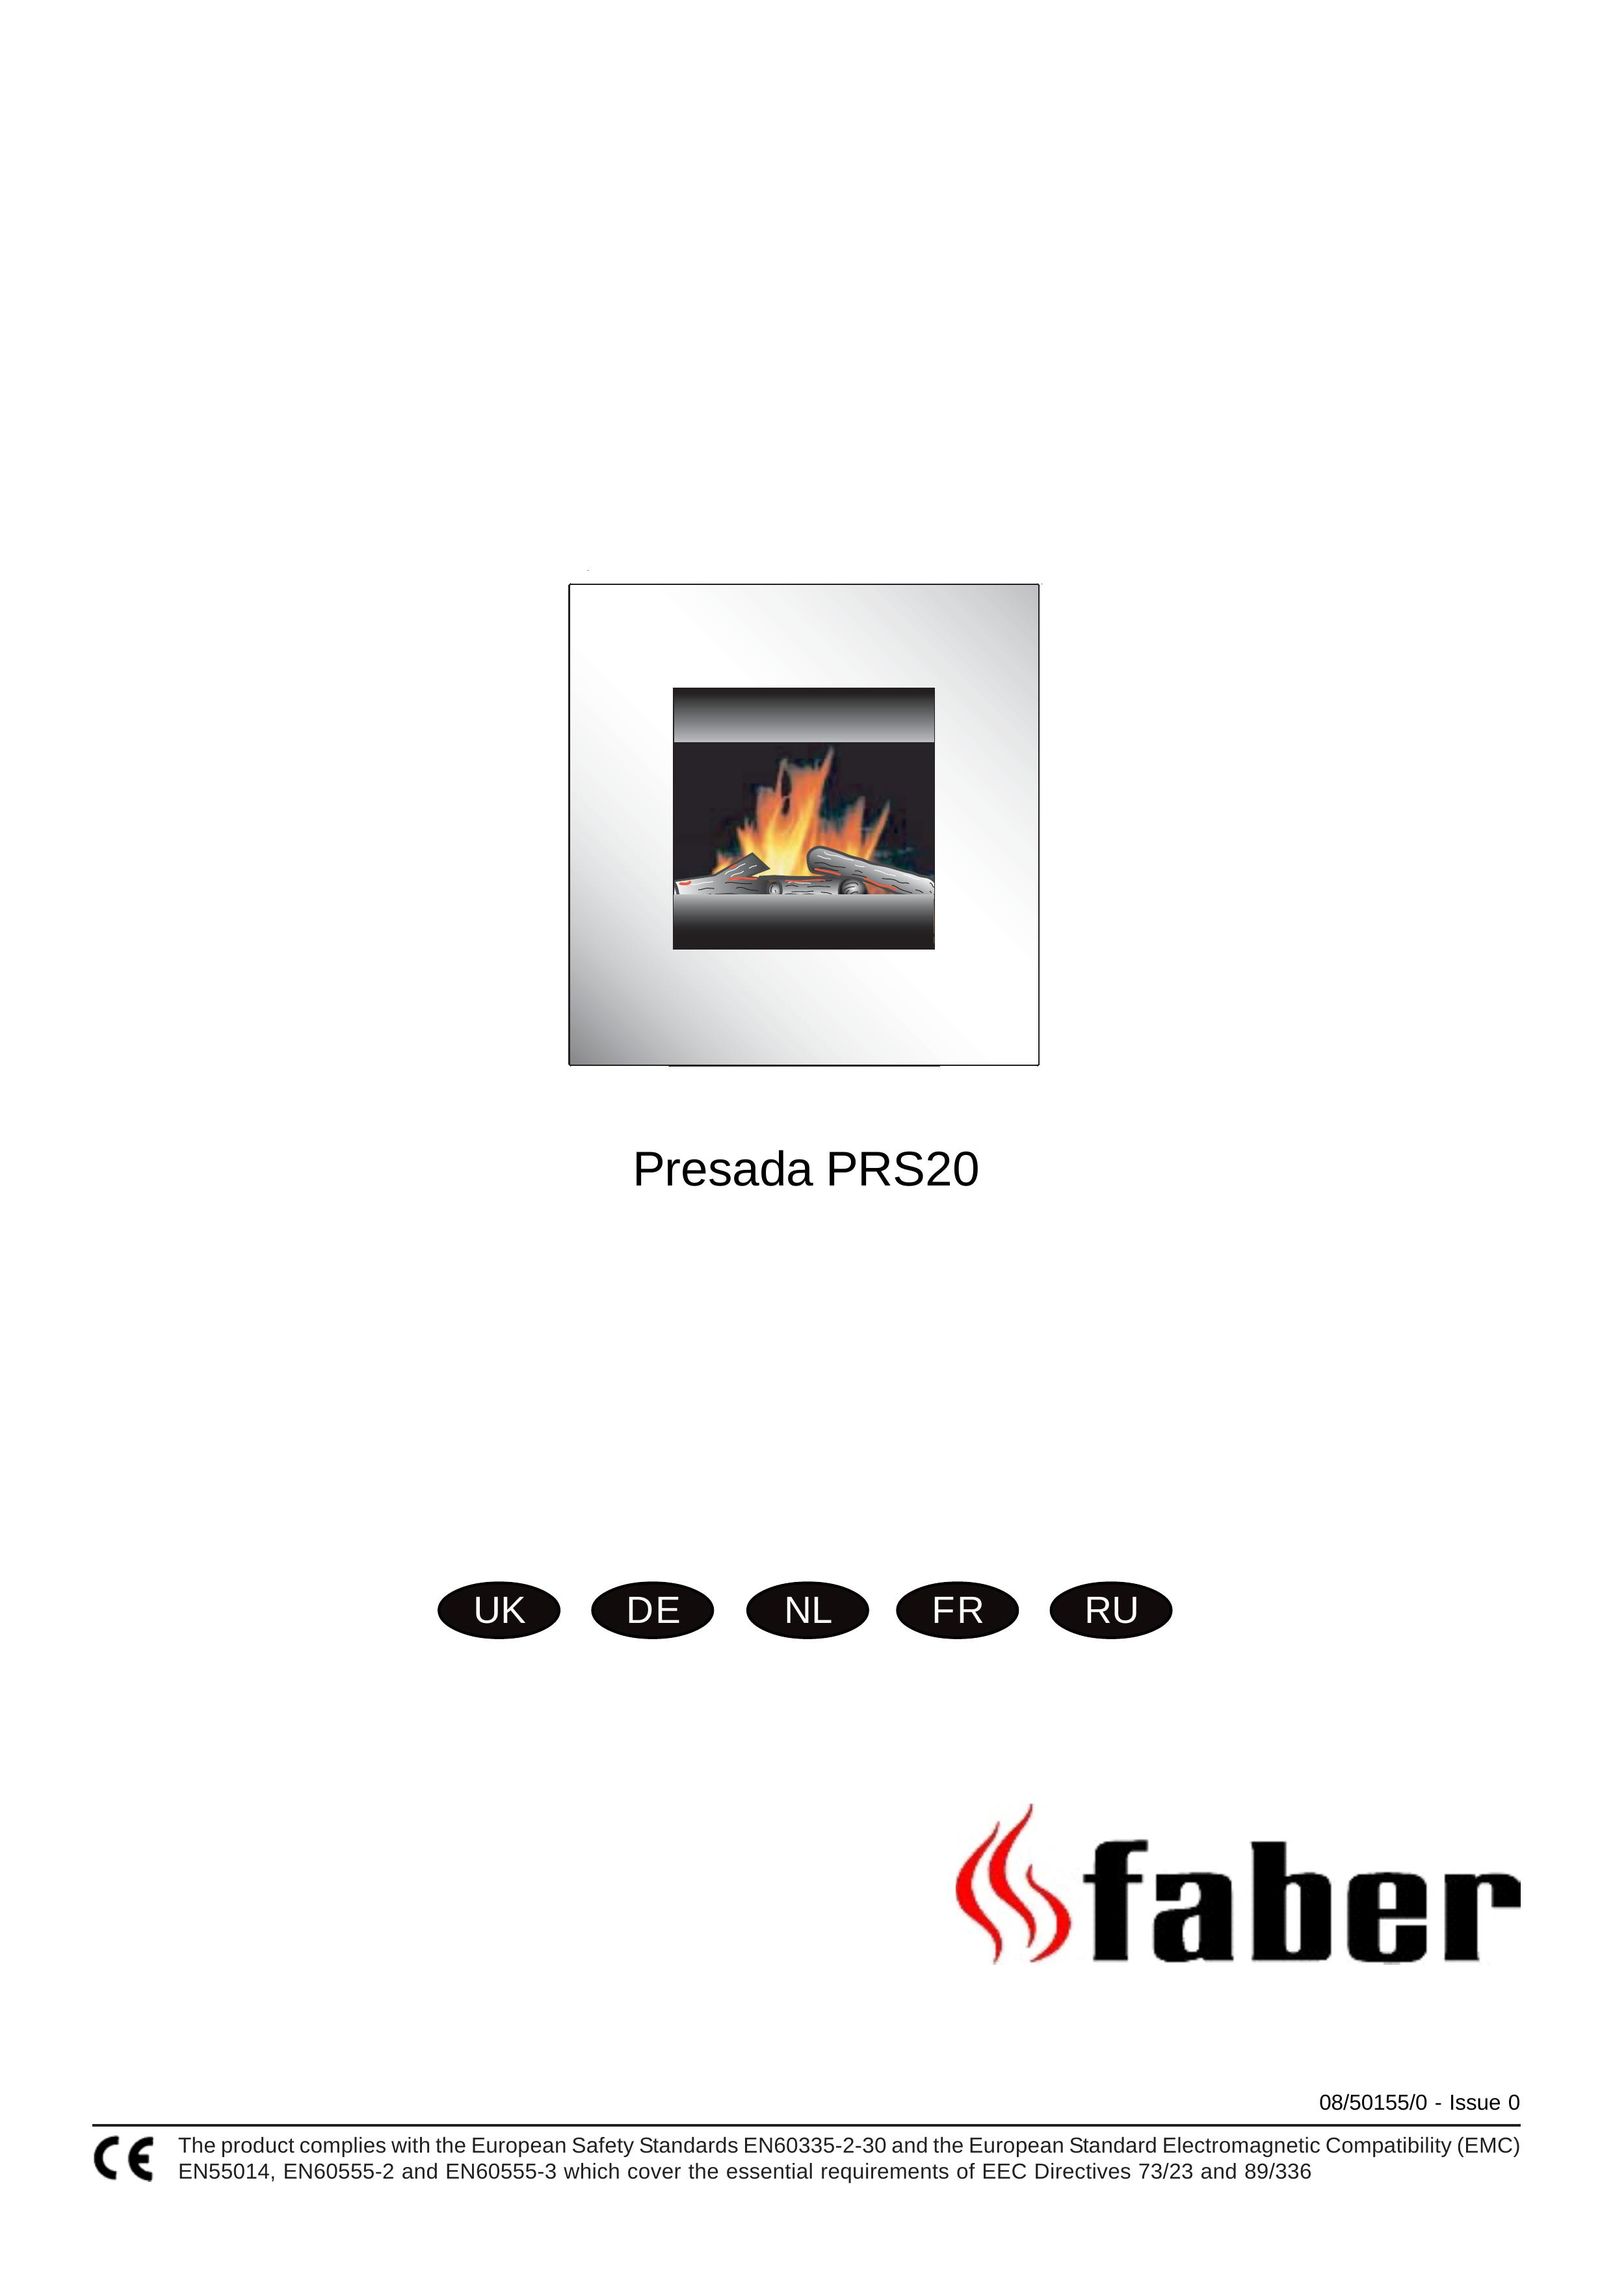 Faber PRS20 Indoor Fireplace User Manual